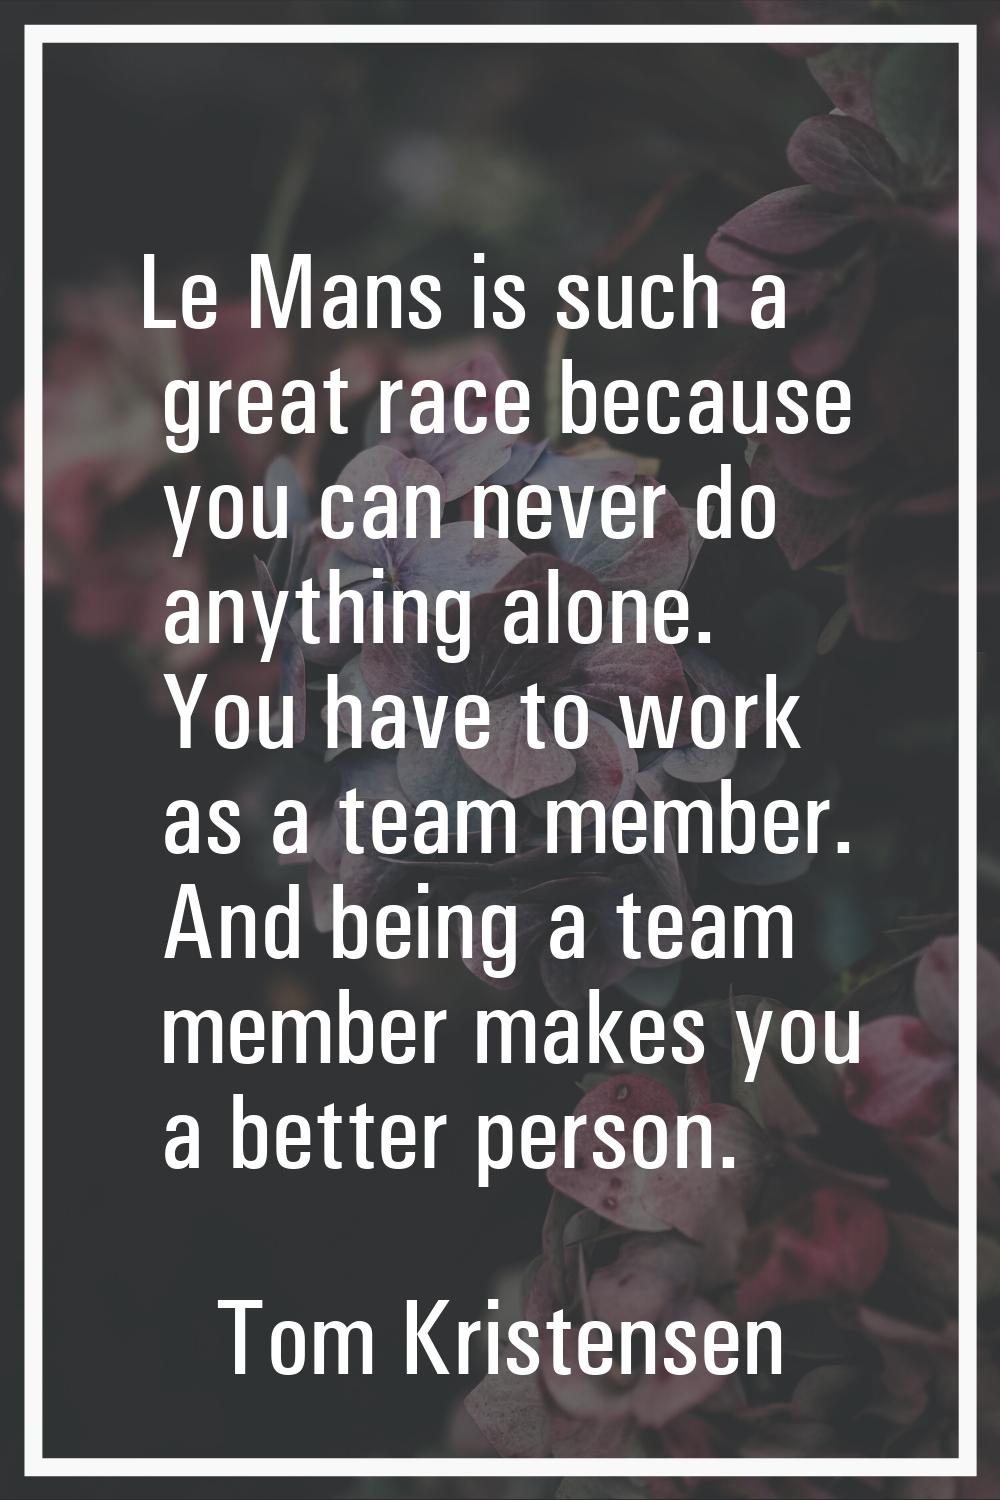 Le Mans is such a great race because you can never do anything alone. You have to work as a team me